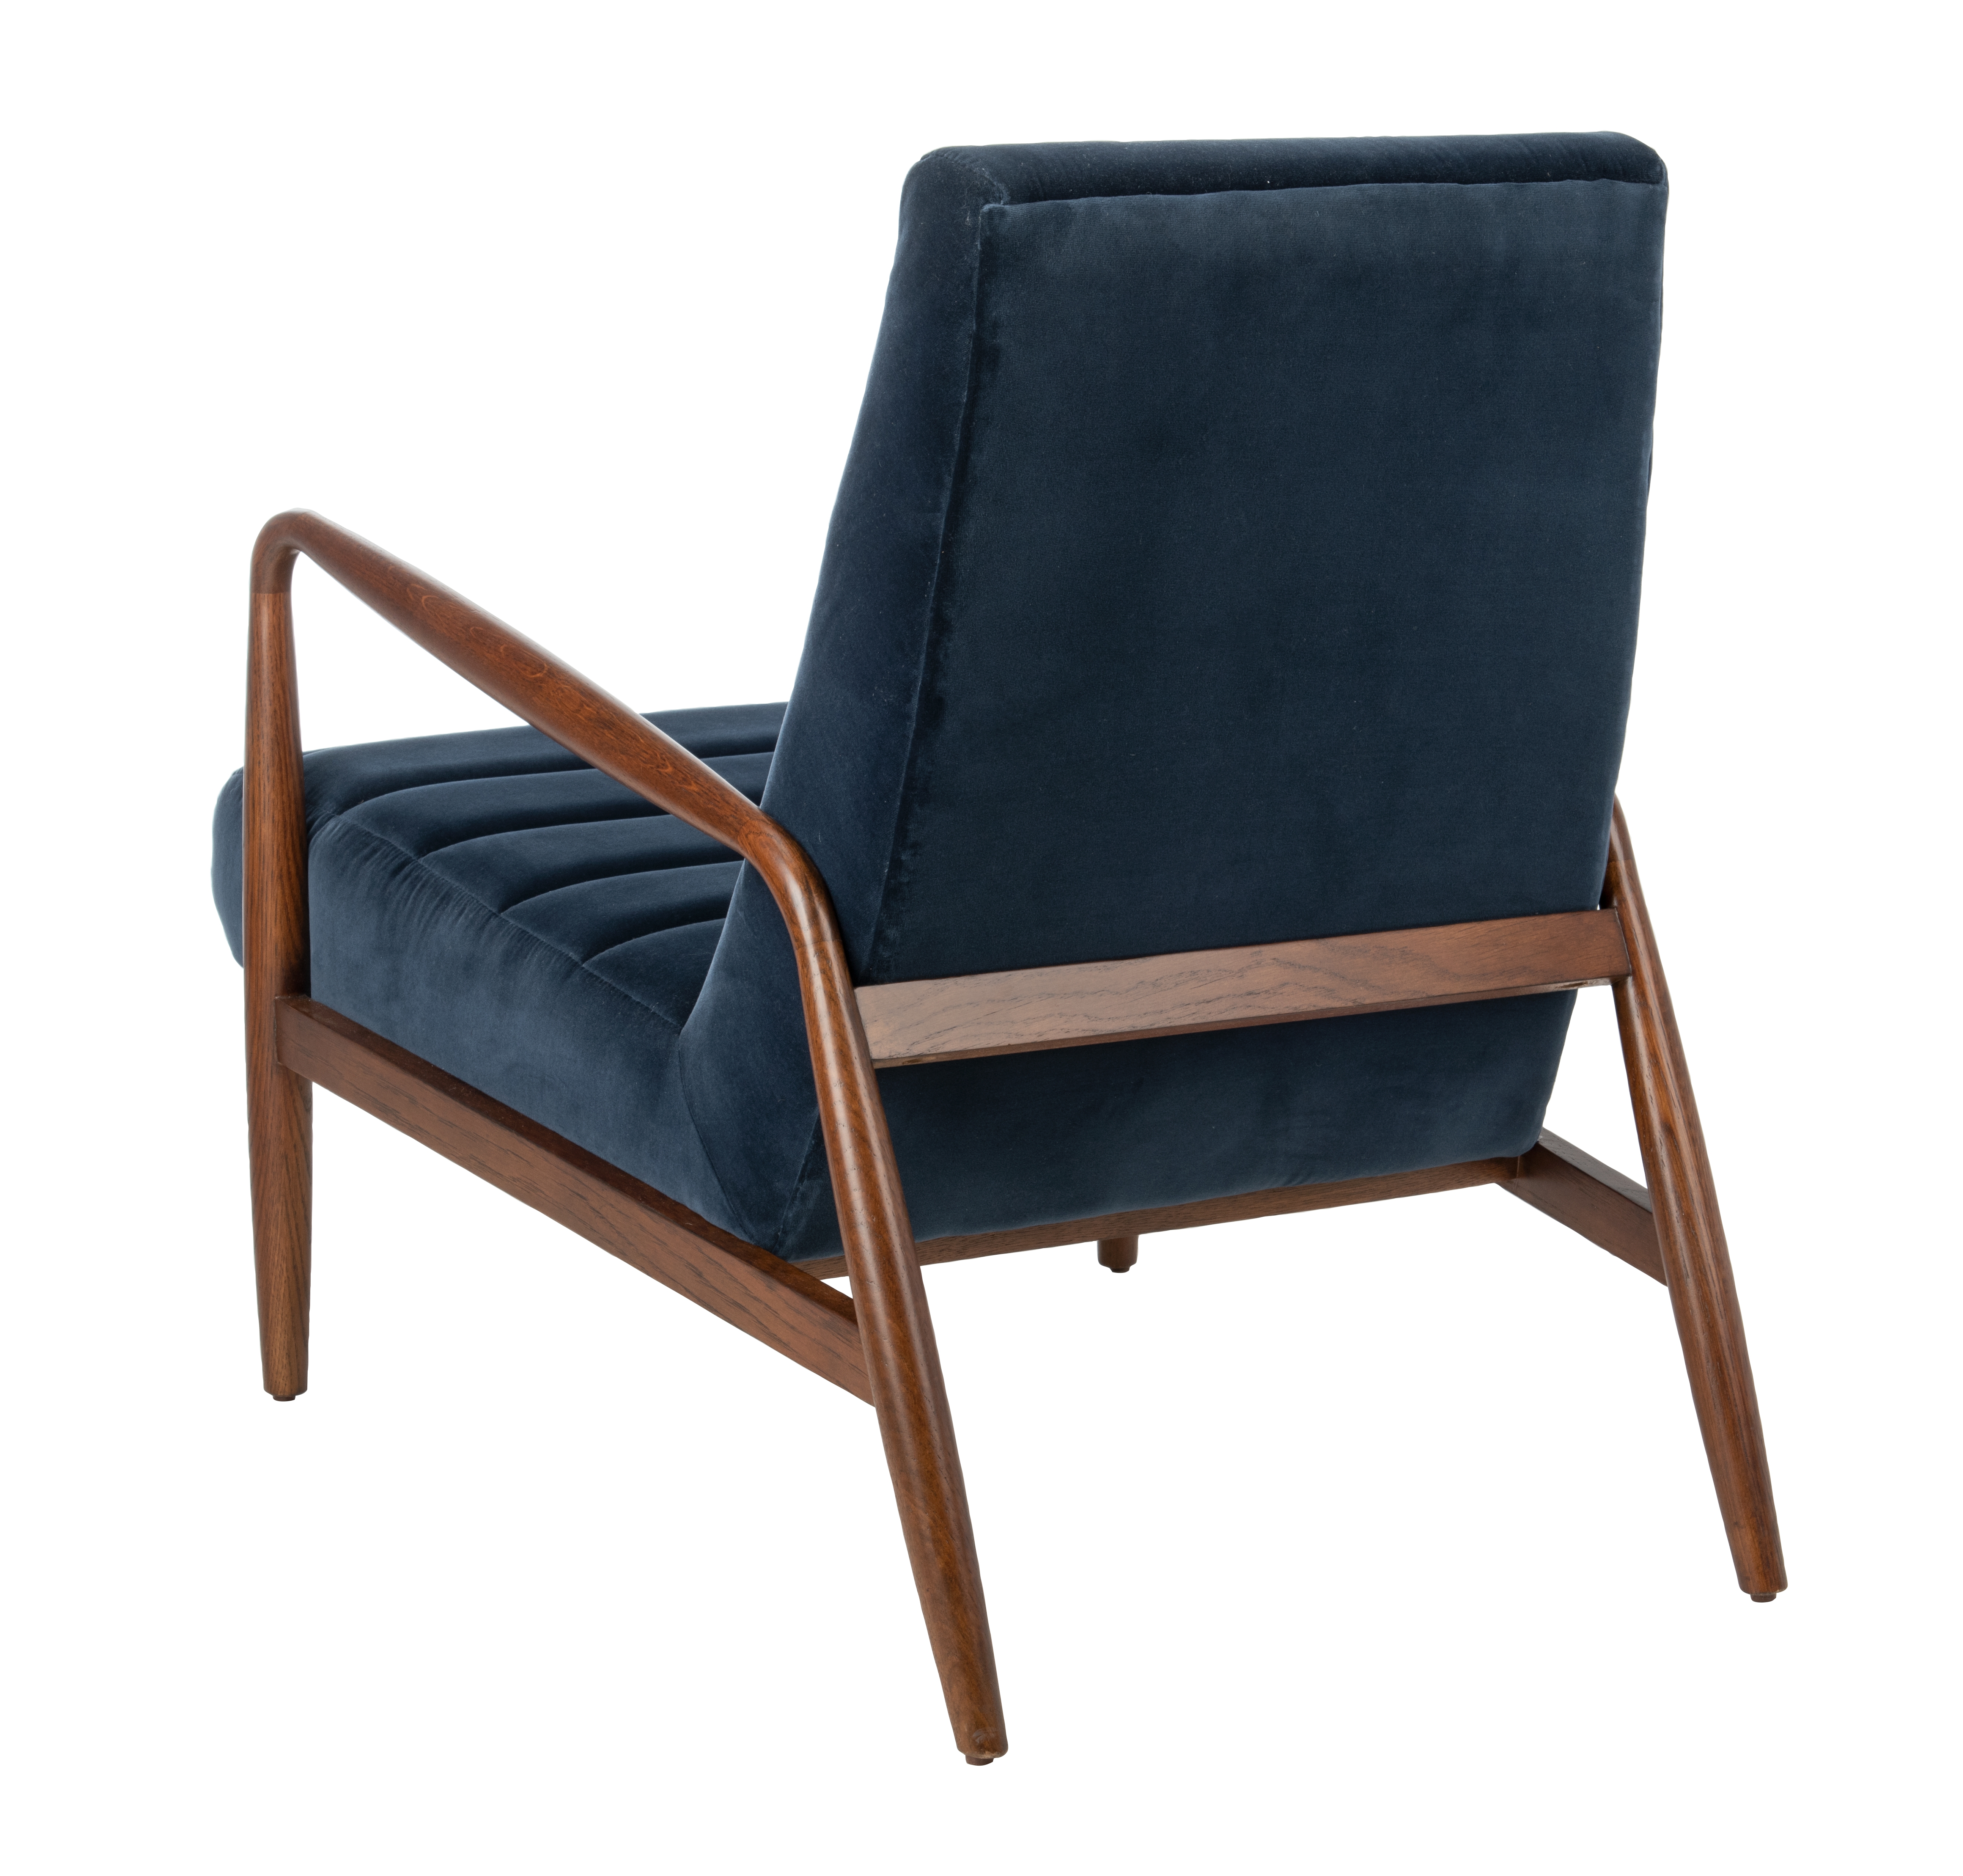 Willow Channel Tufted Arm Chair - Navy/Dark Walnut - Arlo Home - Image 2